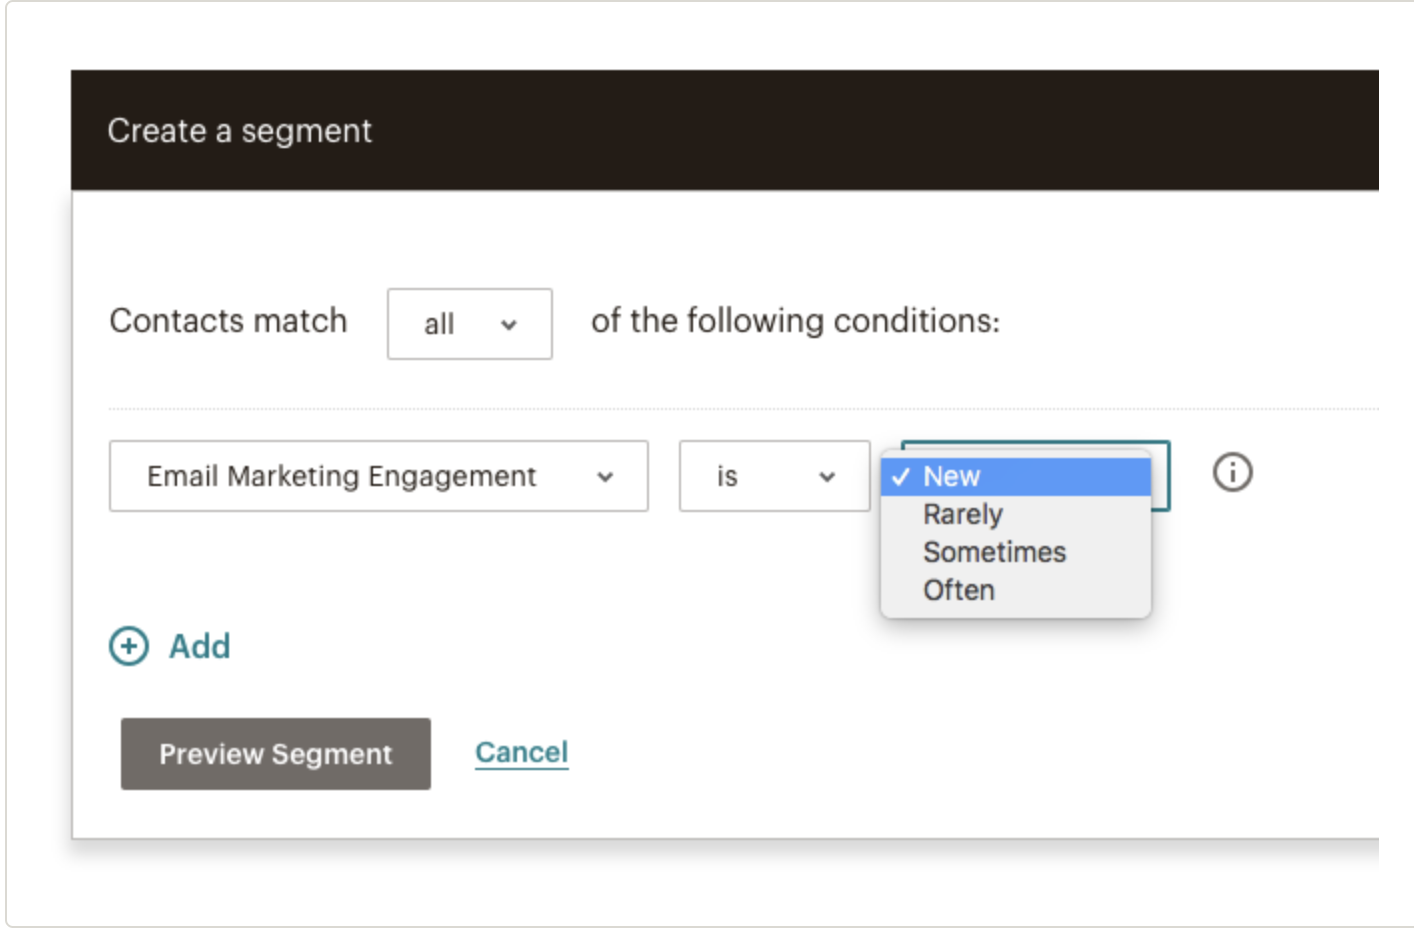 segment creation for engagement-based triggers